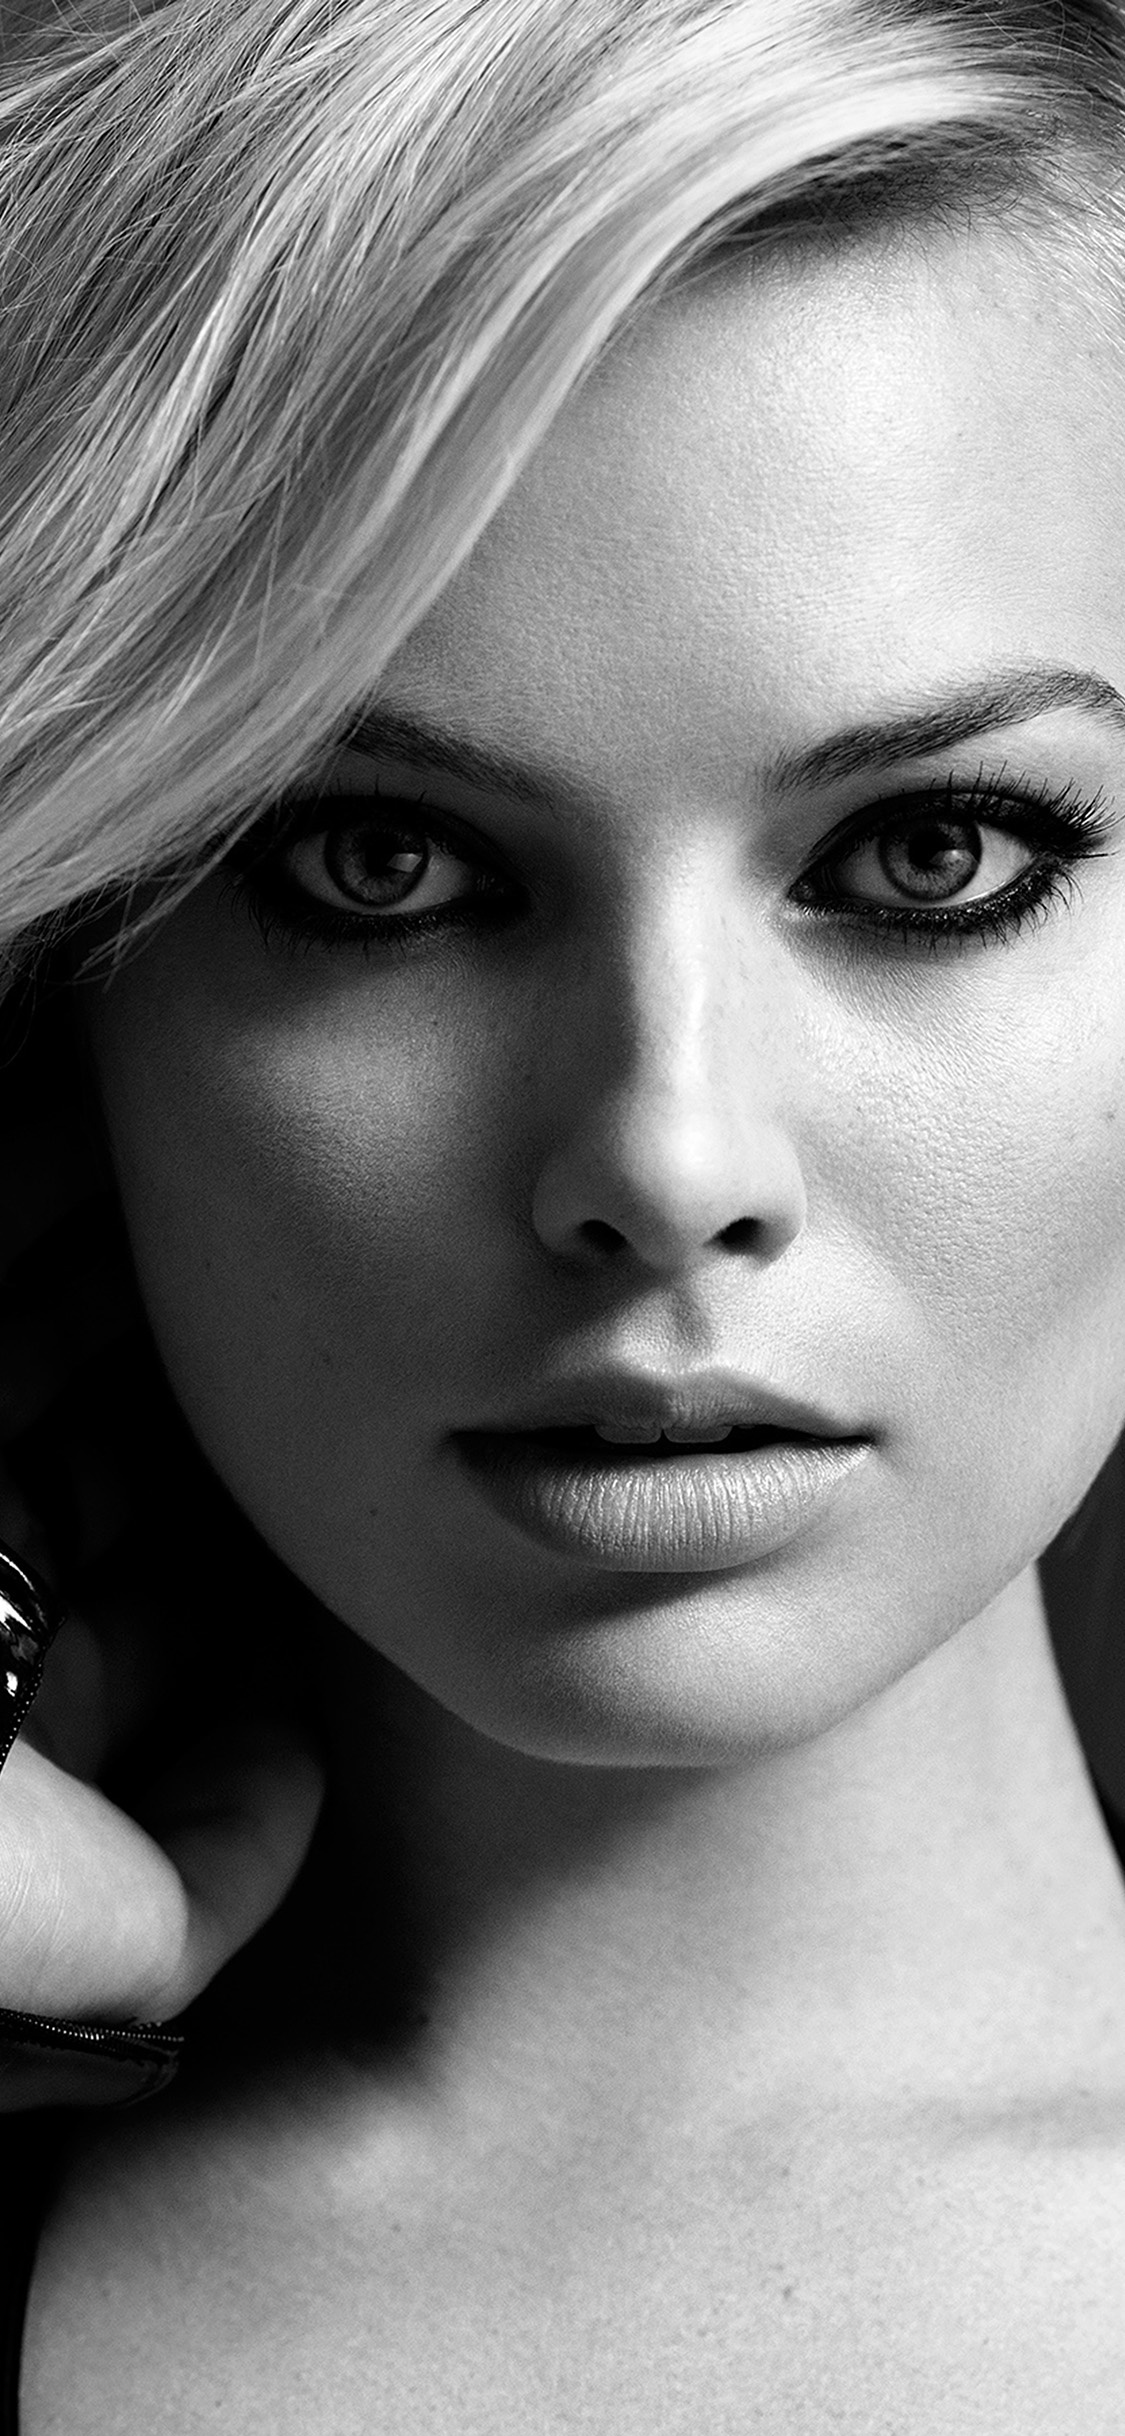 Margot Robbie: An Australian actress, who started with roles in a few Australian independent films and television series, and later moved to the U.S. to pursue her Hollywood dream. 1130x2440 HD Background.